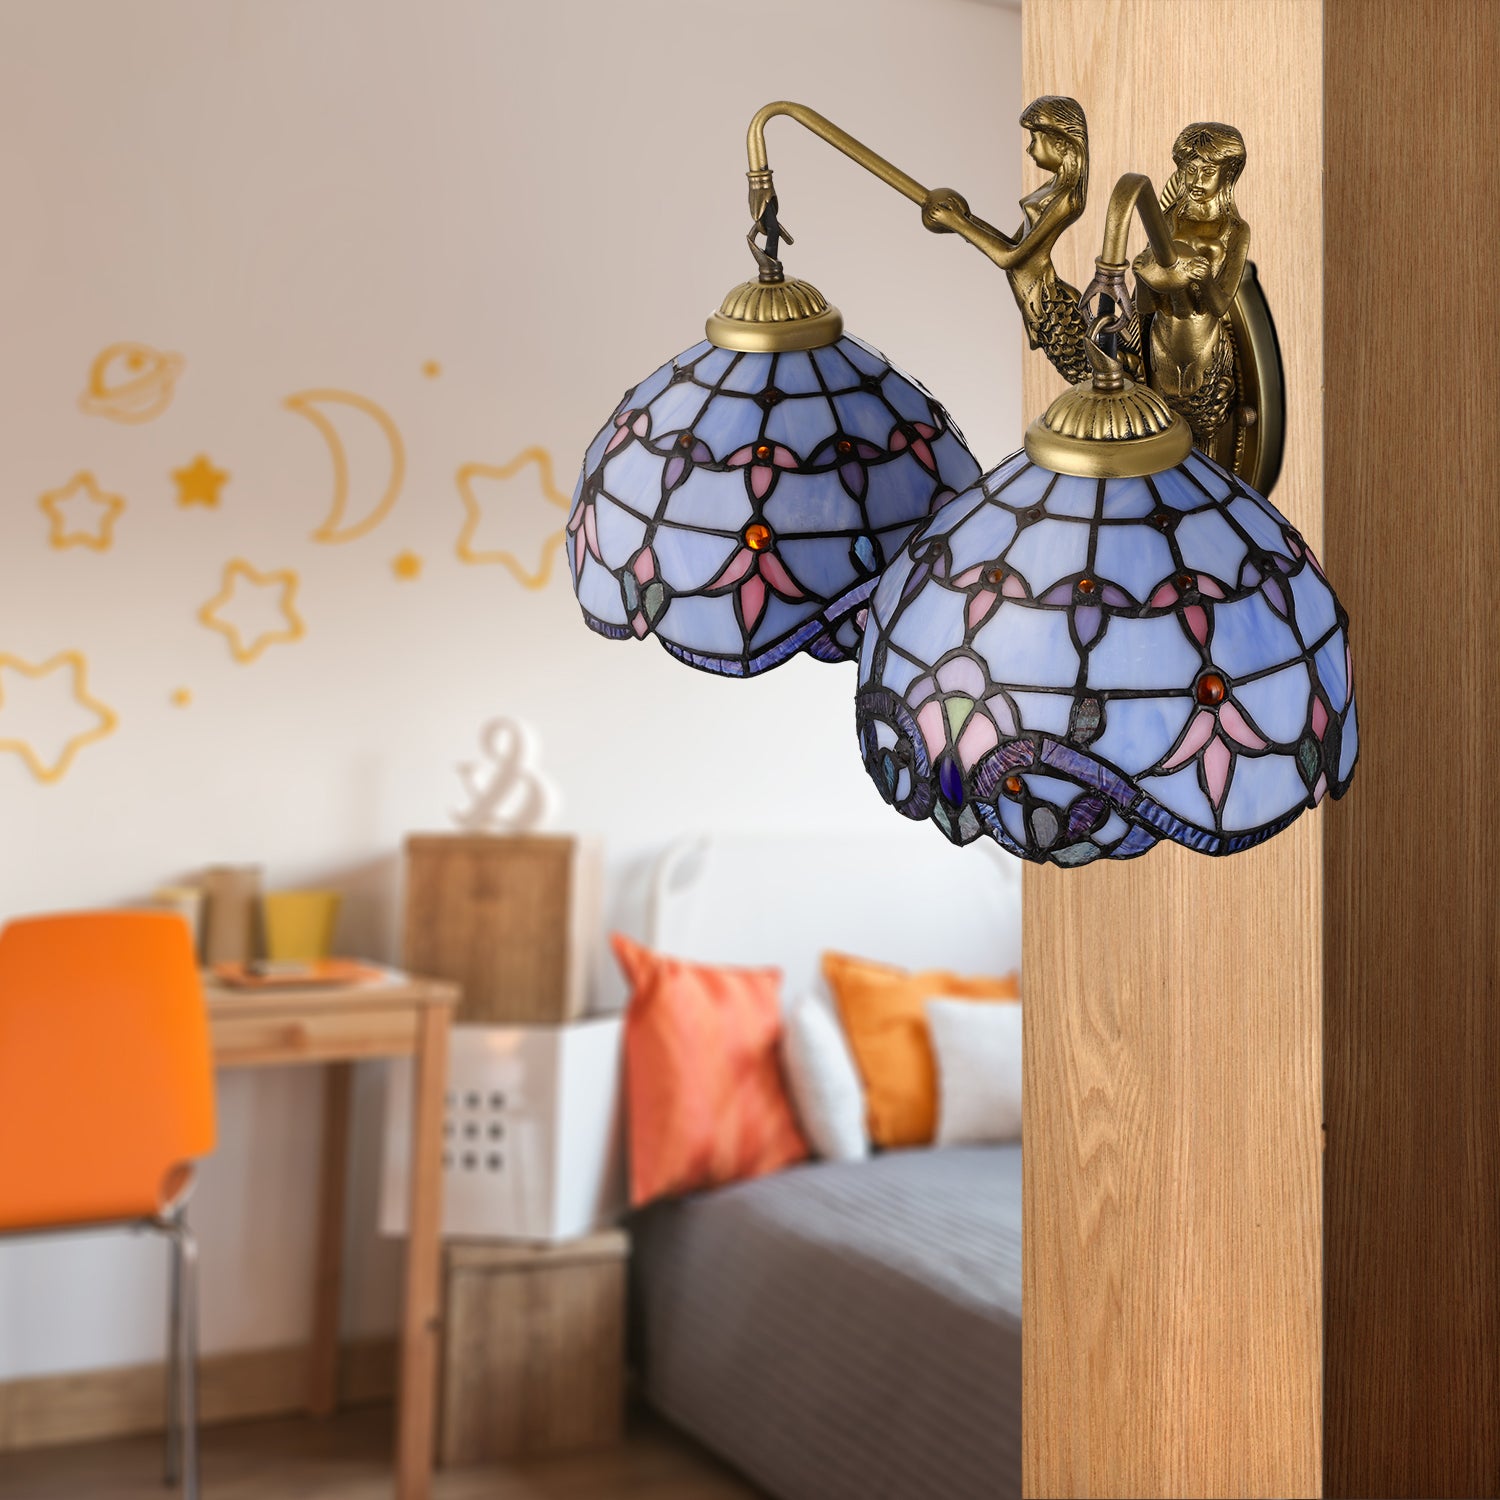 Blue Glass Dome Wall Mounted Light Mediterranean 2 Heads Brass Sconce Lighting with Mermaid Backplate